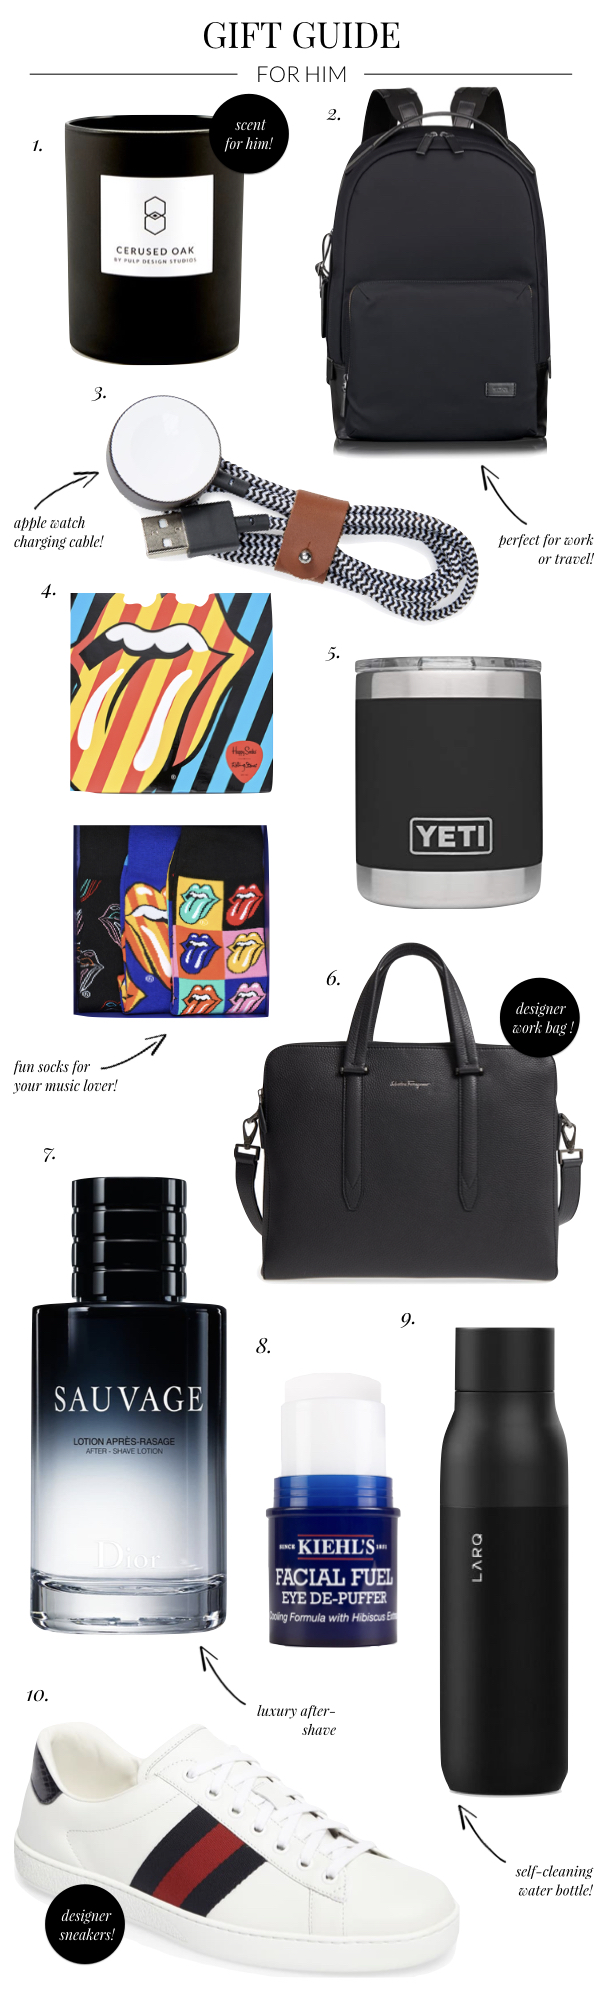 Looking at men's bags as birthday gift for my husband. Which one